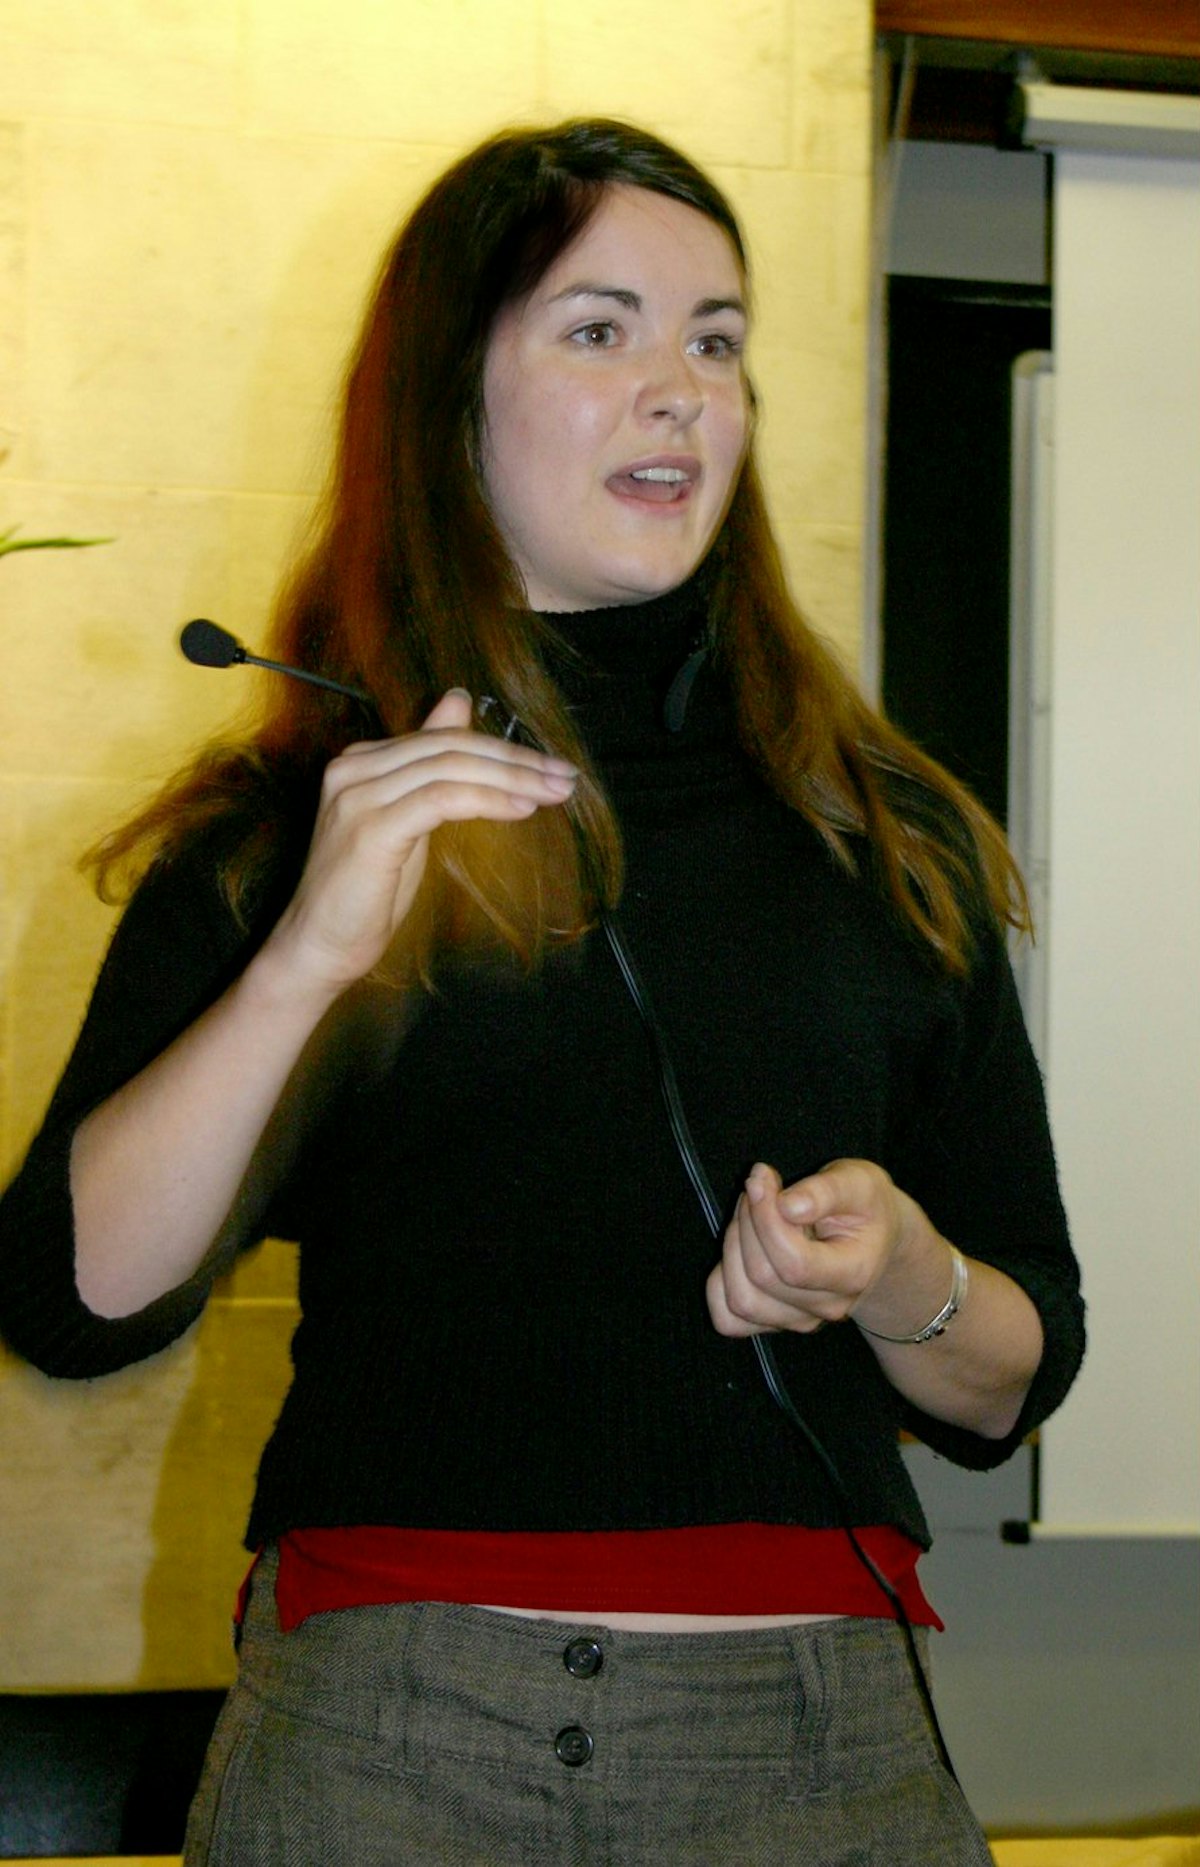 Poppy Villiers-Stuart, a training officer specializing in sustainable development at the University of Brighton, gives a presentation about community empowerment at the "Science, Faith and Climate Change" at Oxford, 15-17 September 2006. (Photograph by Gemma Parsons)